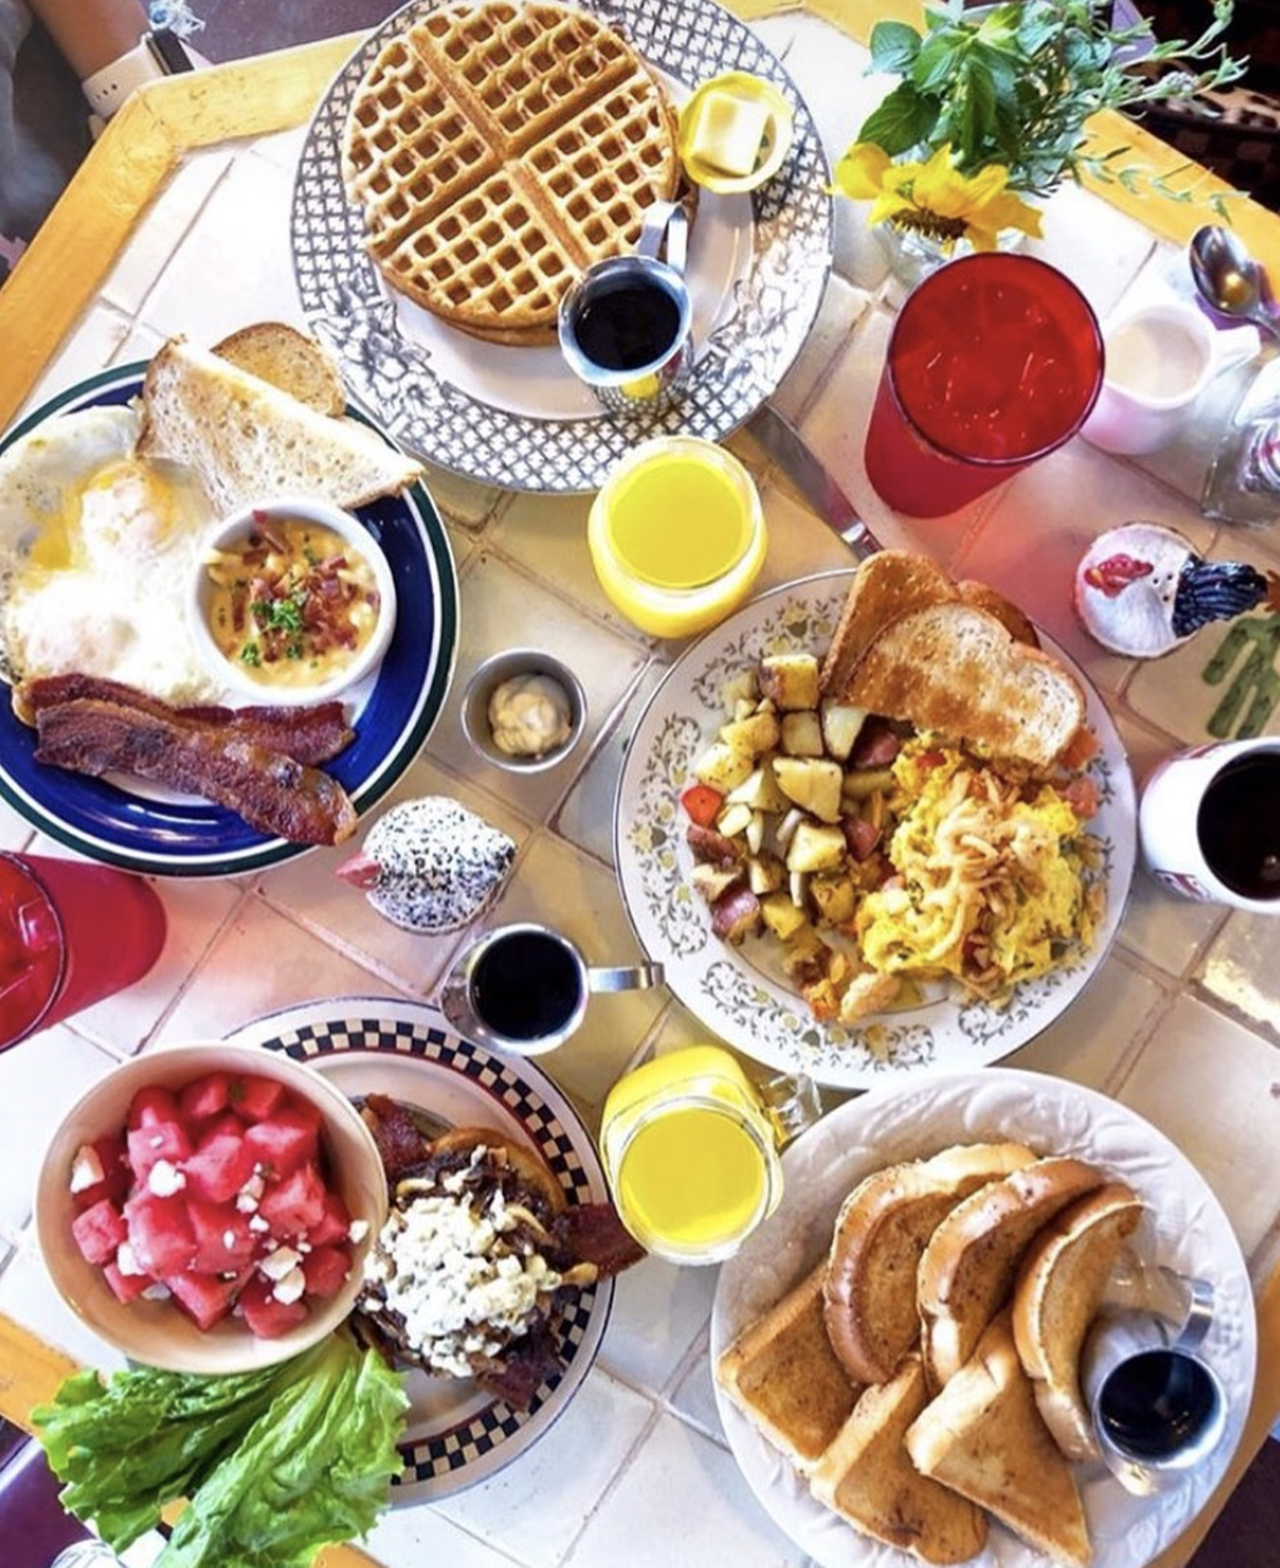 Comfort Cafe
5616 Bandera Rd, (512) 575-0348, facebook.com/5616BanderaRd
Enjoy unique options for omelets and scrambles or — if you’re feeling fancy — try Comfort Cafe’s decadent stuffed french toast crepes or waffles. 
Photo via Instagram / comfortcafesatx